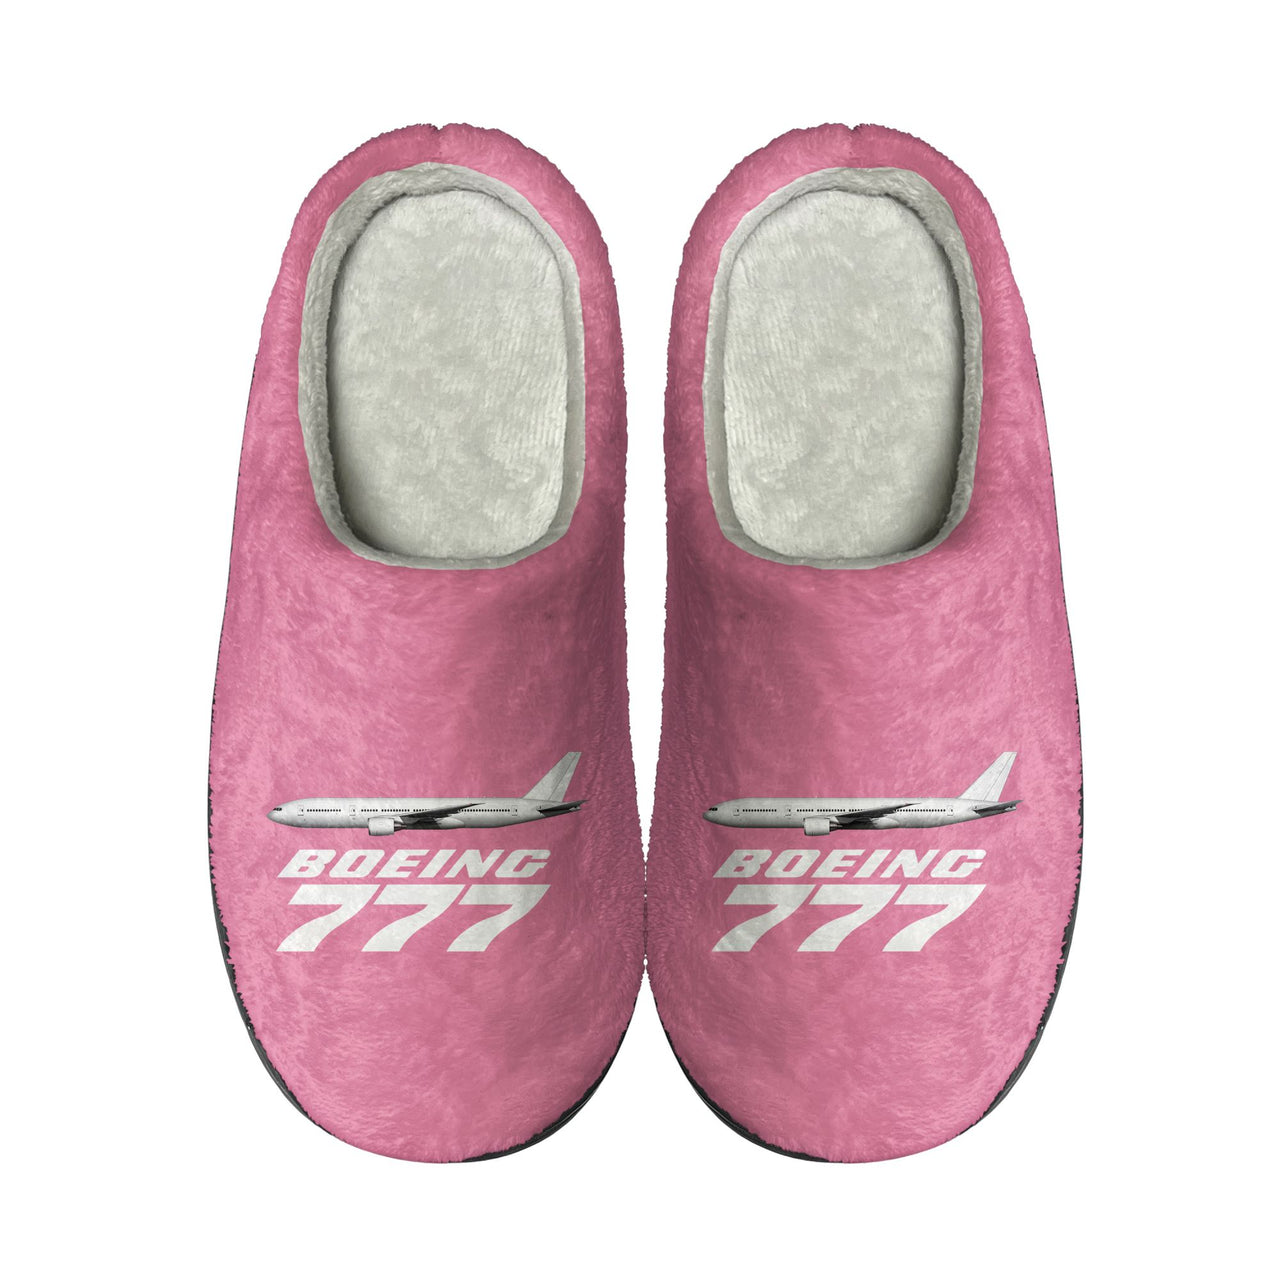 The Boeing 777 Designed Cotton Slippers